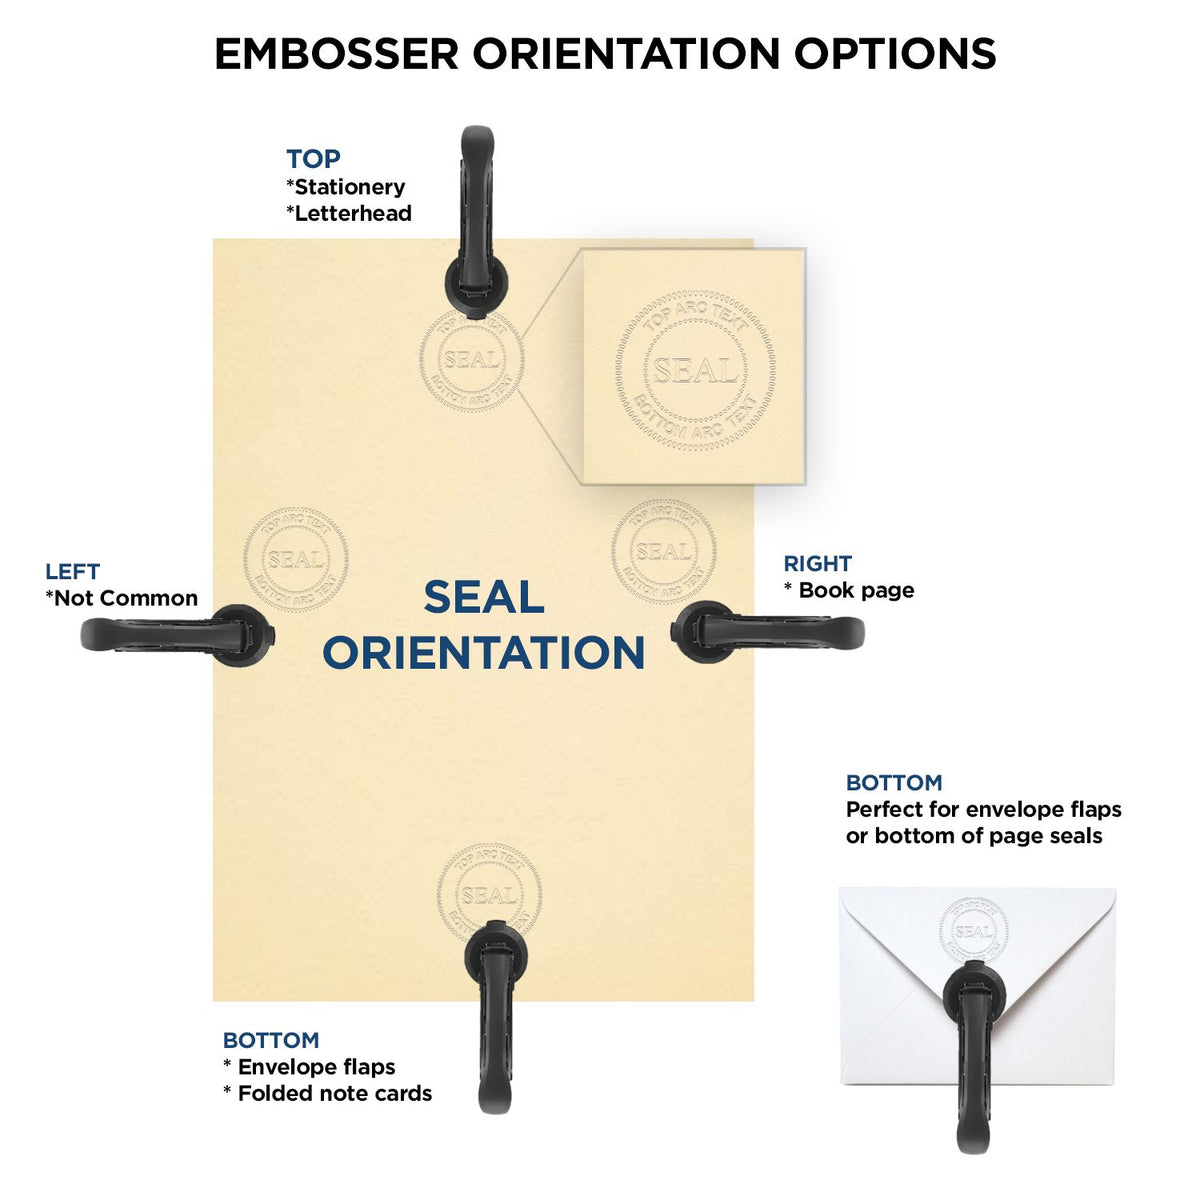 An infographic for the Handheld Montana Professional Geologist Embosser showing embosser orientation, this is showing examples of a top, bottom, right and left insert.